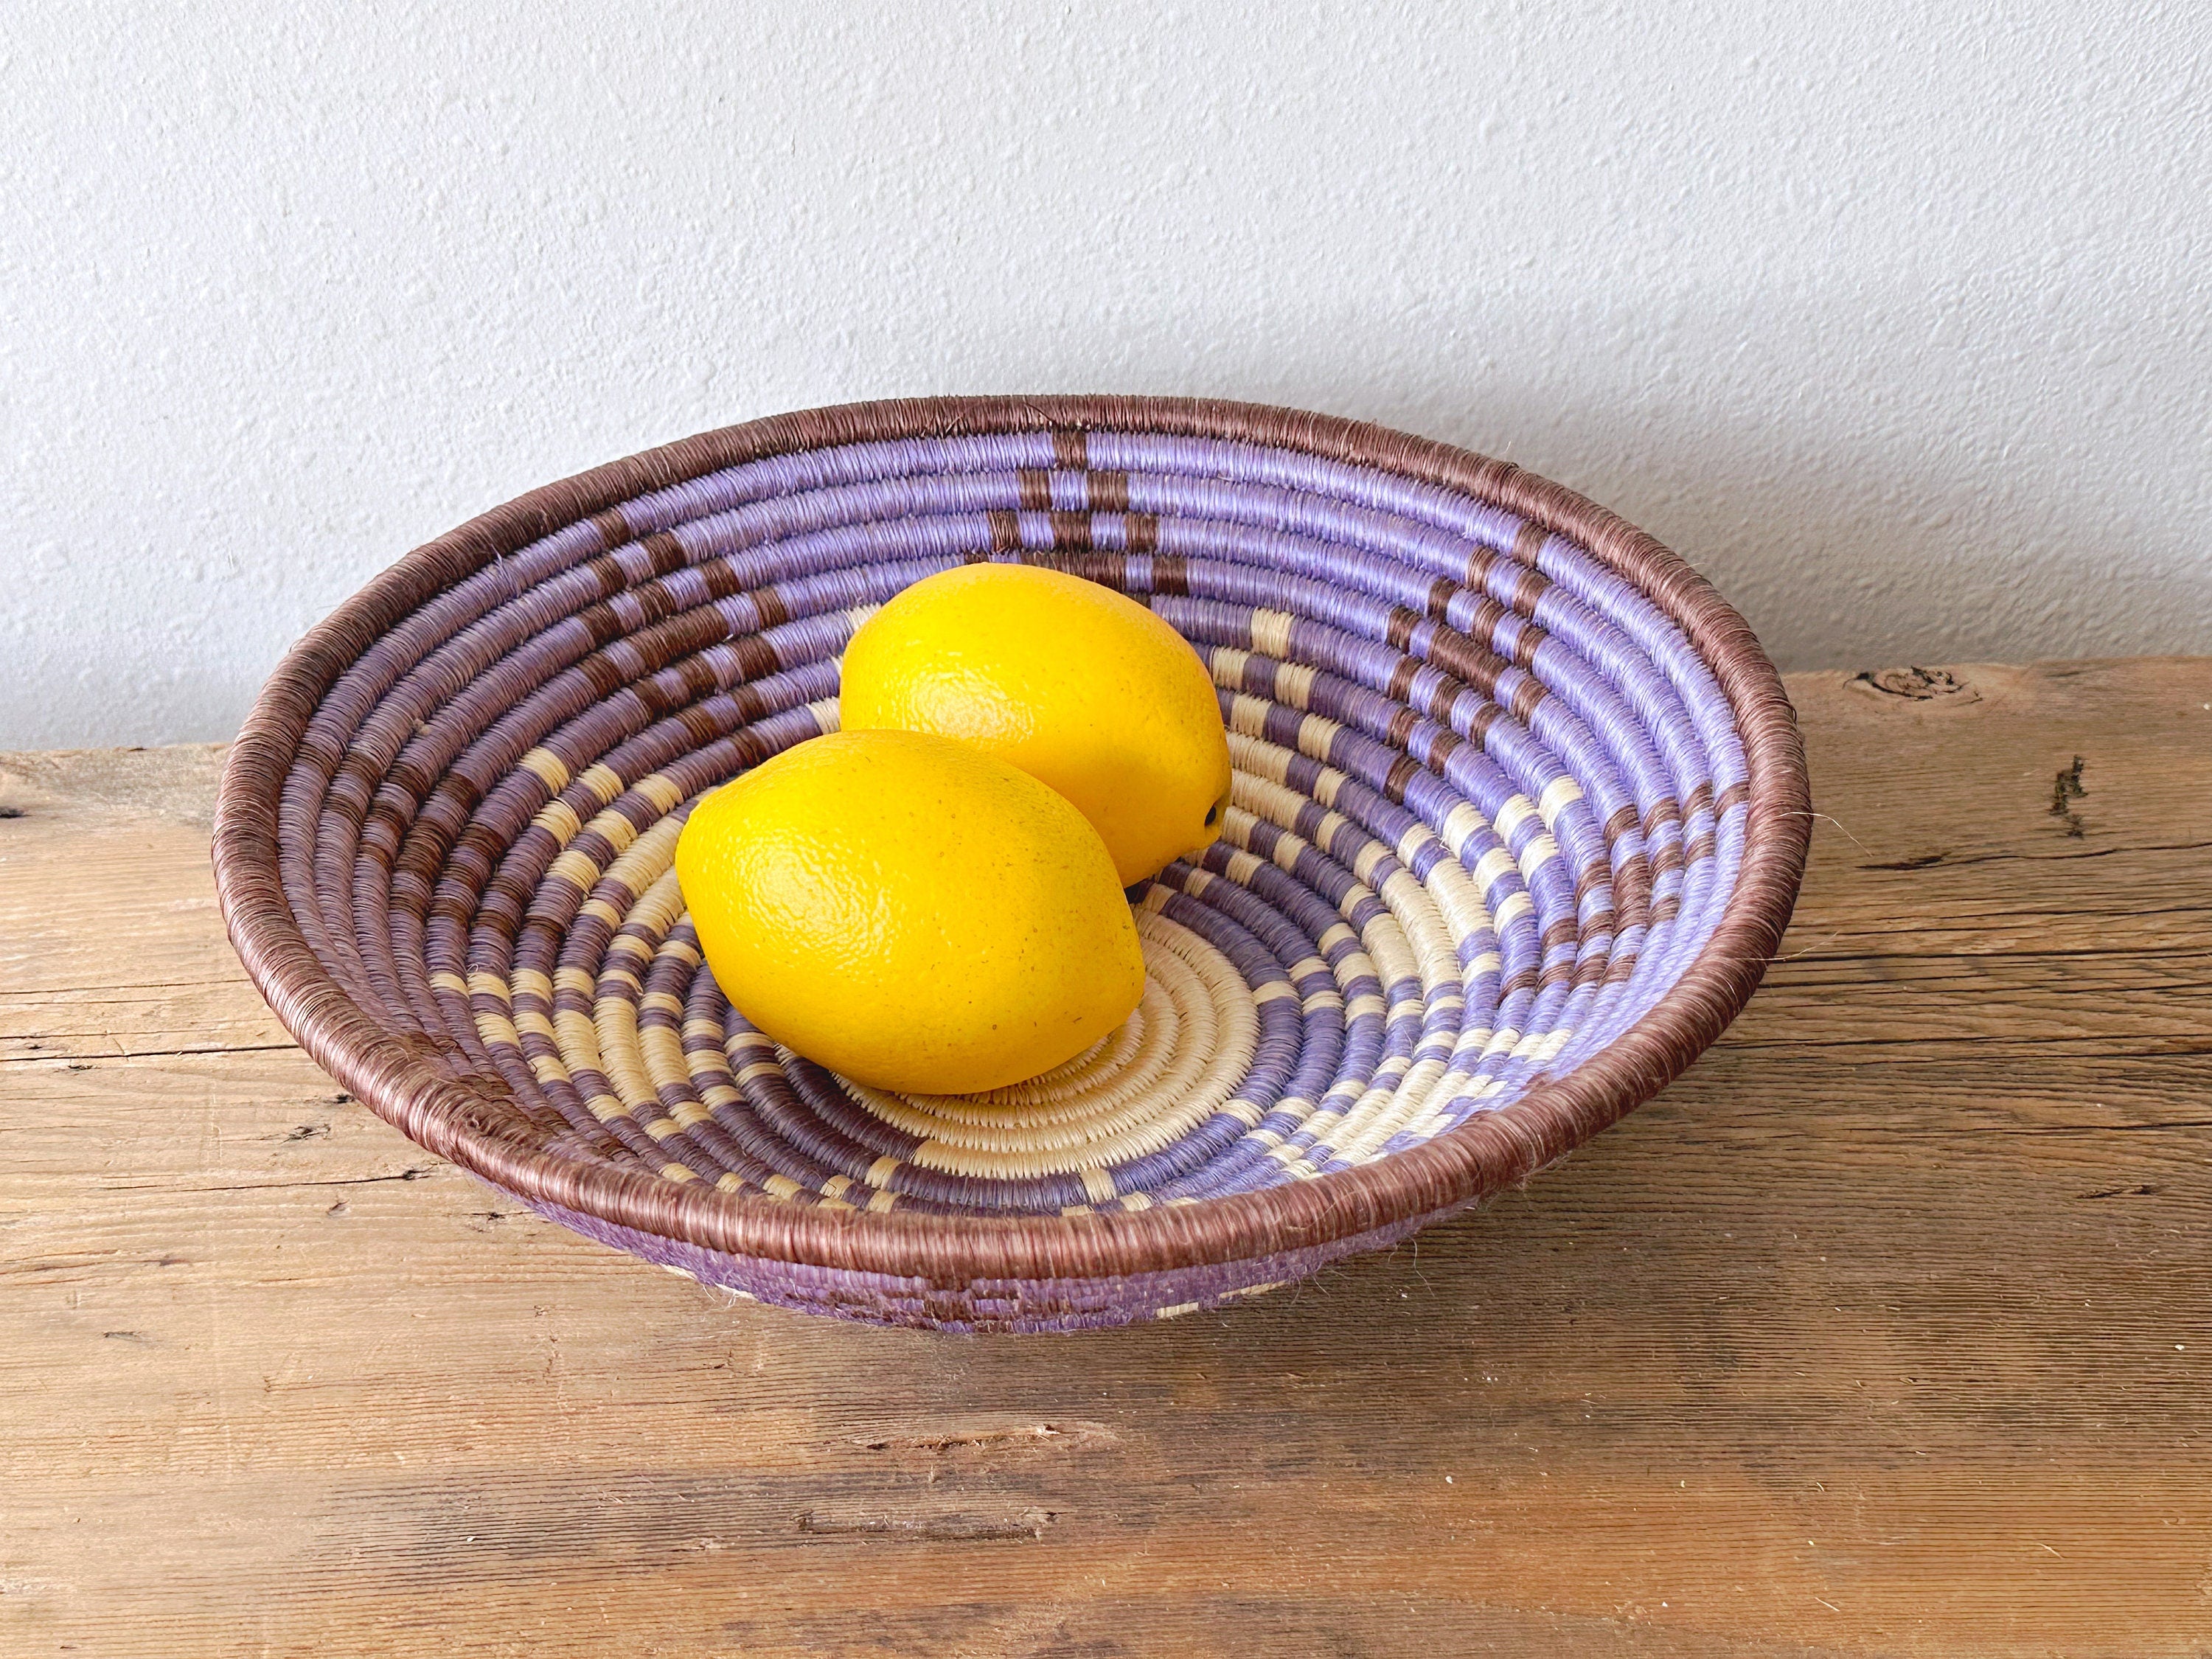 Set of 4 Vintage Hand Woven Round Hanging Baskets by All Across Africa | African Style Home Decor Fruit Basket Catchall Bowl in Purple